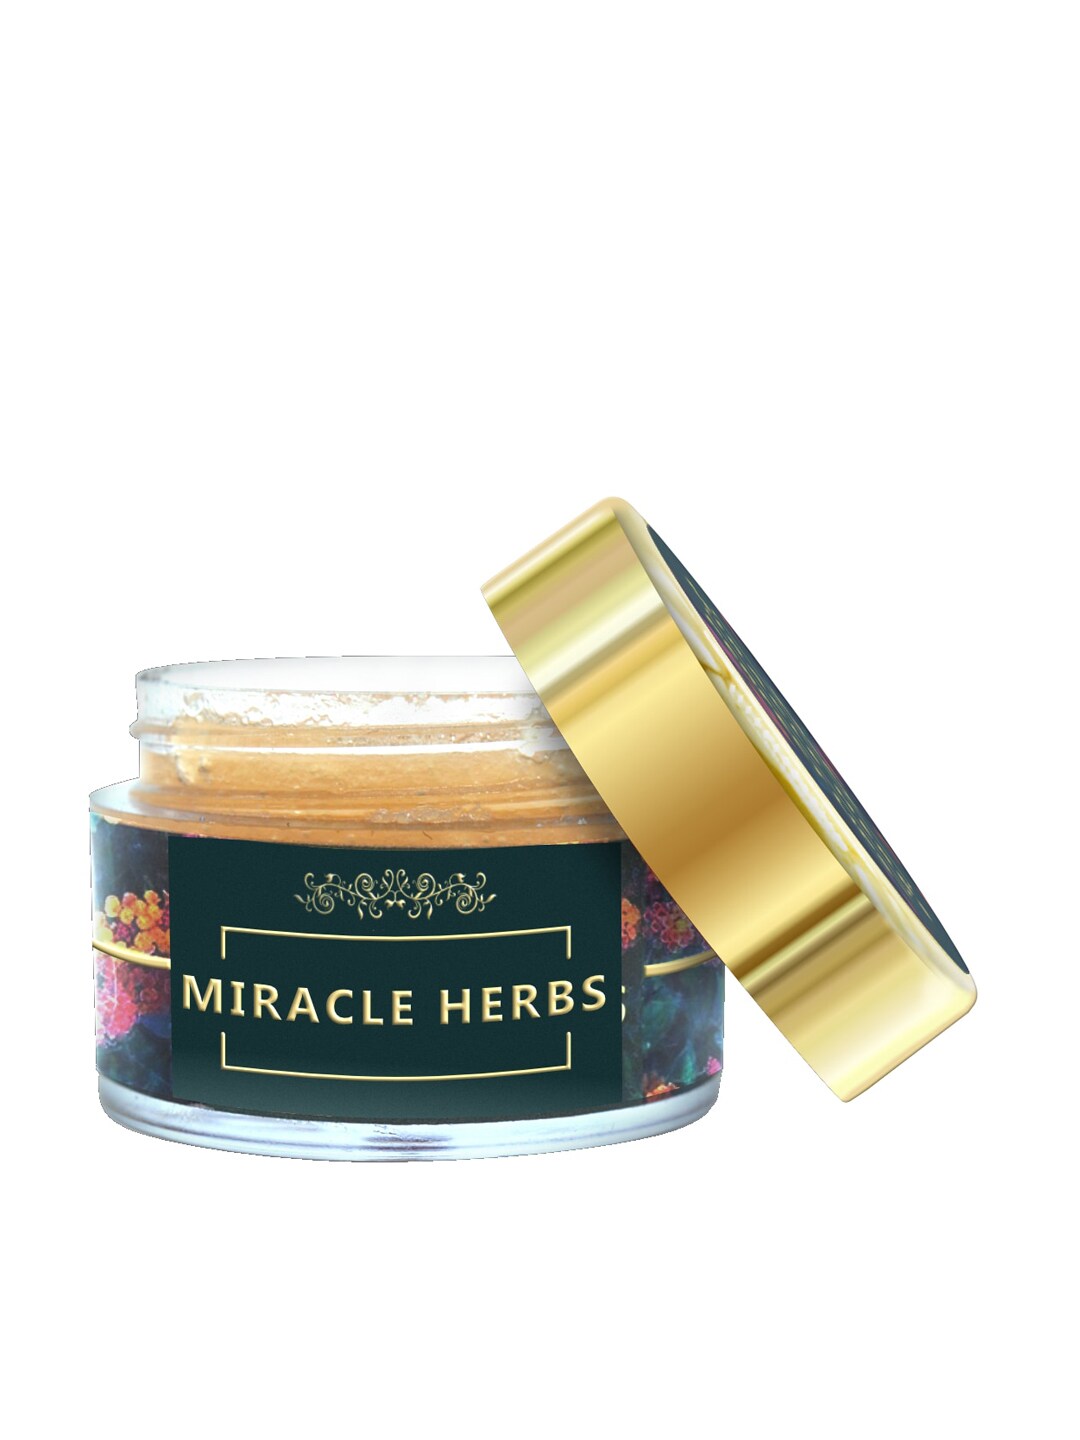 MIRACLE HERBS Unisex Green Perfect Lip Treatment Balm & Exfoliator Price in India